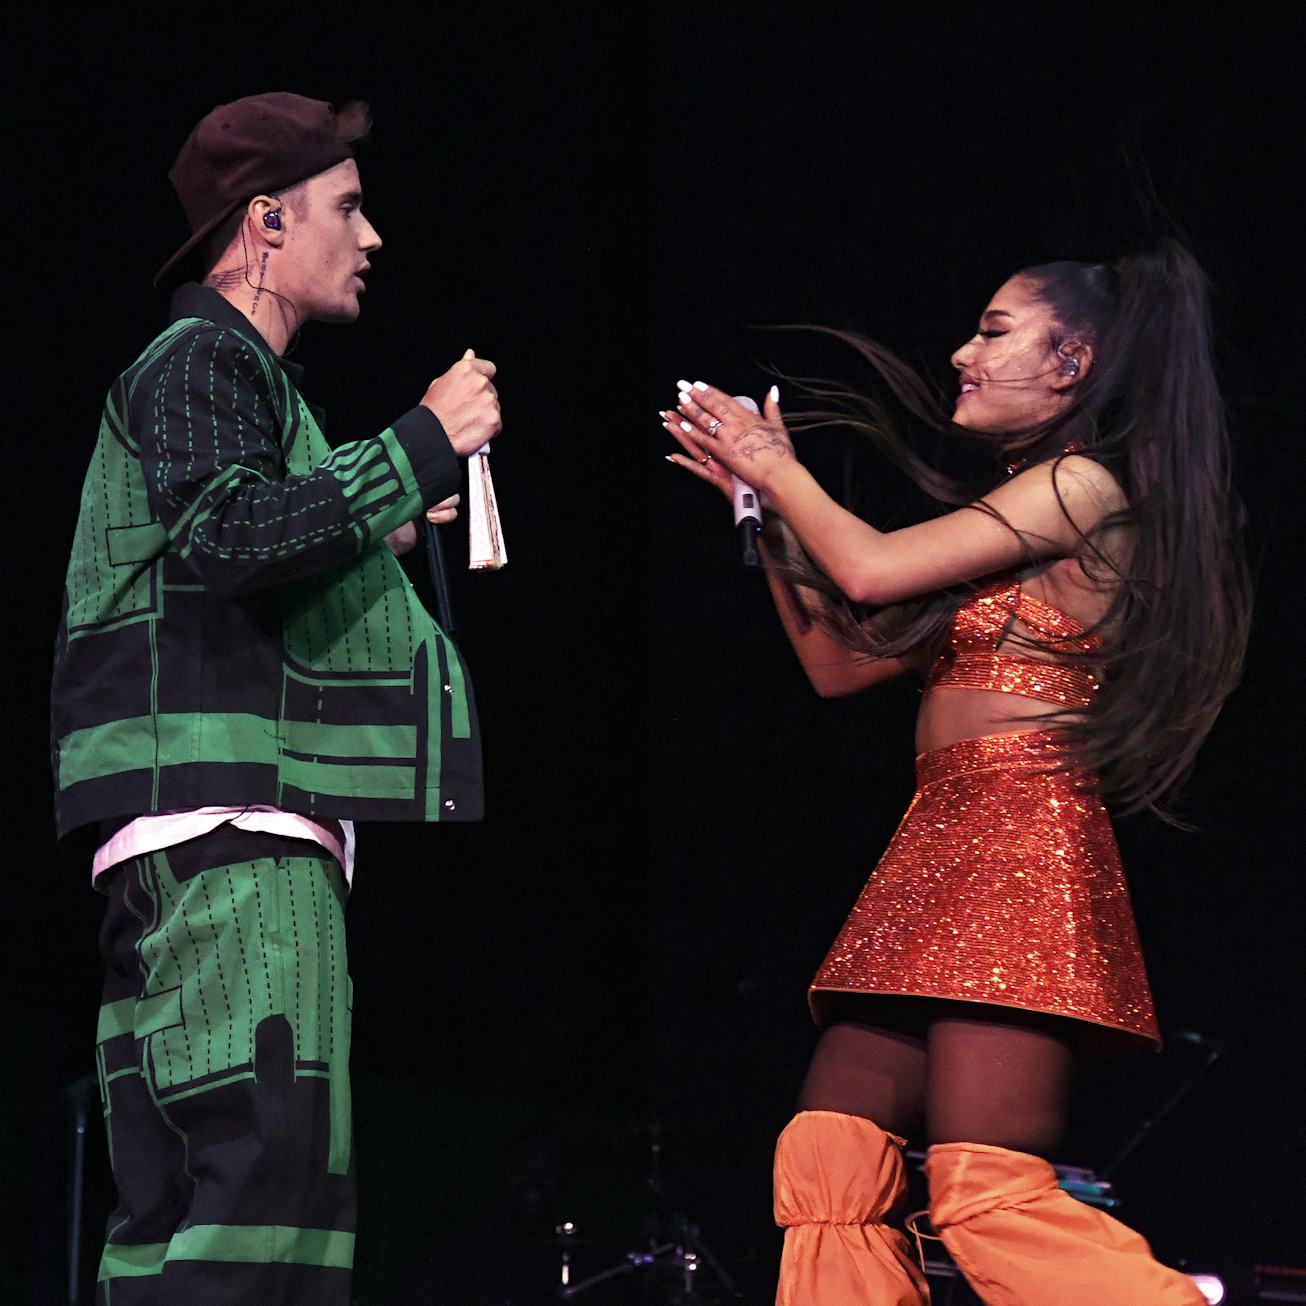 Justin Bieber (L) performs with Ariana Grande at Coachella Stage during the 2019 Coachella Valley Mu...